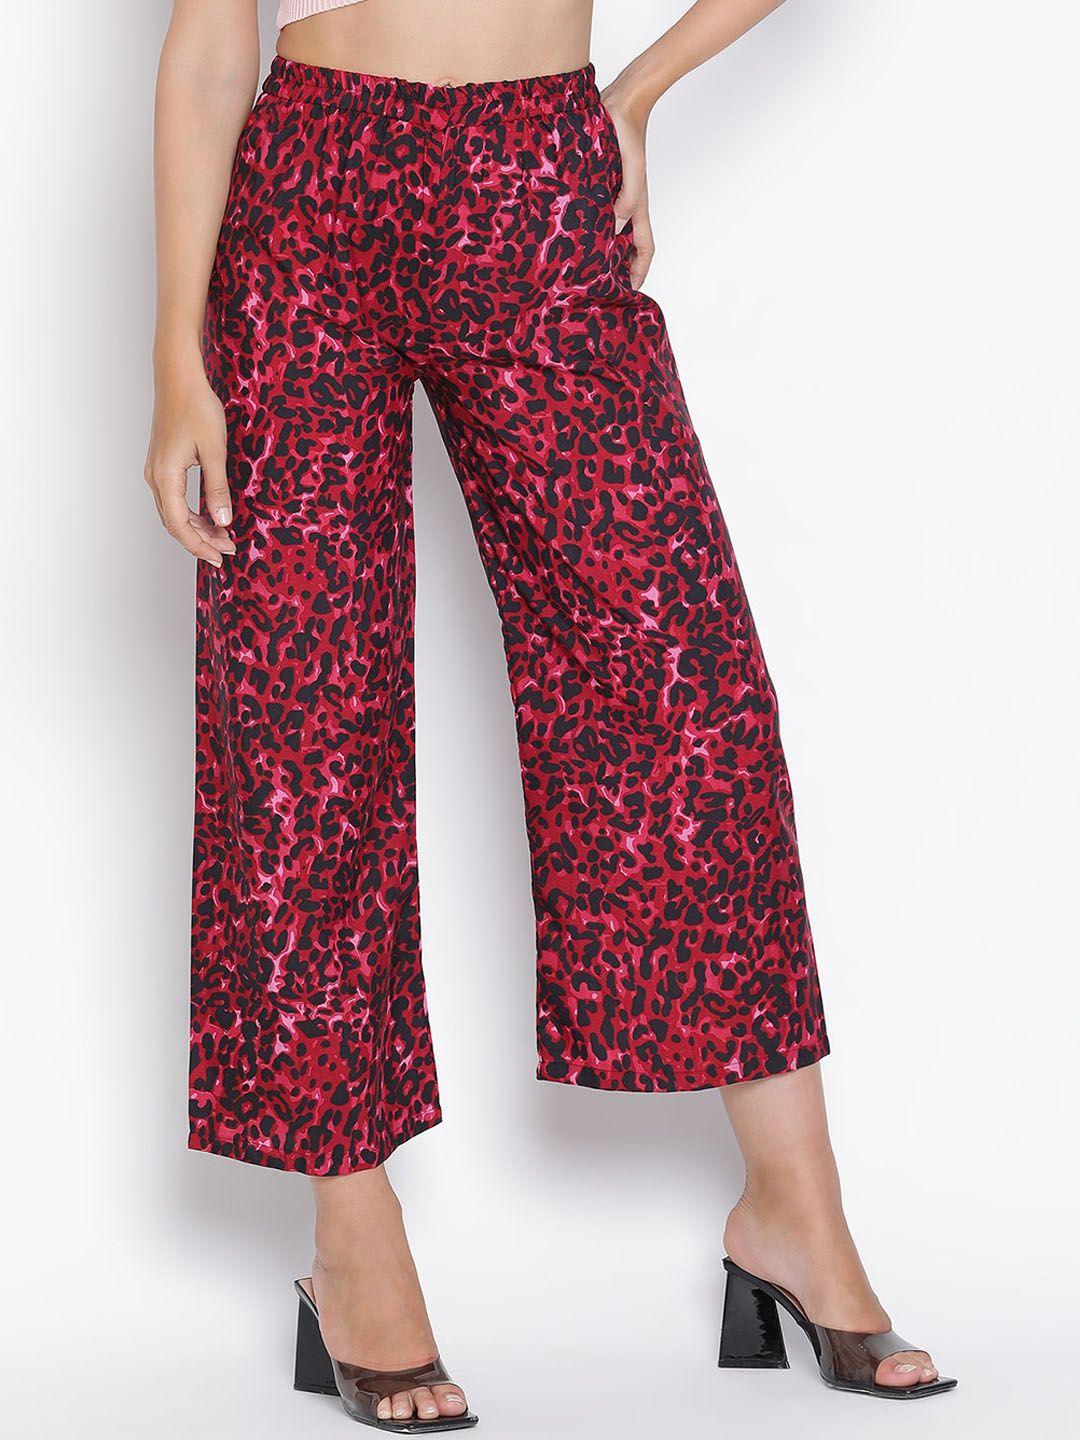 draax fashions women animal printed relaxed flared trousers